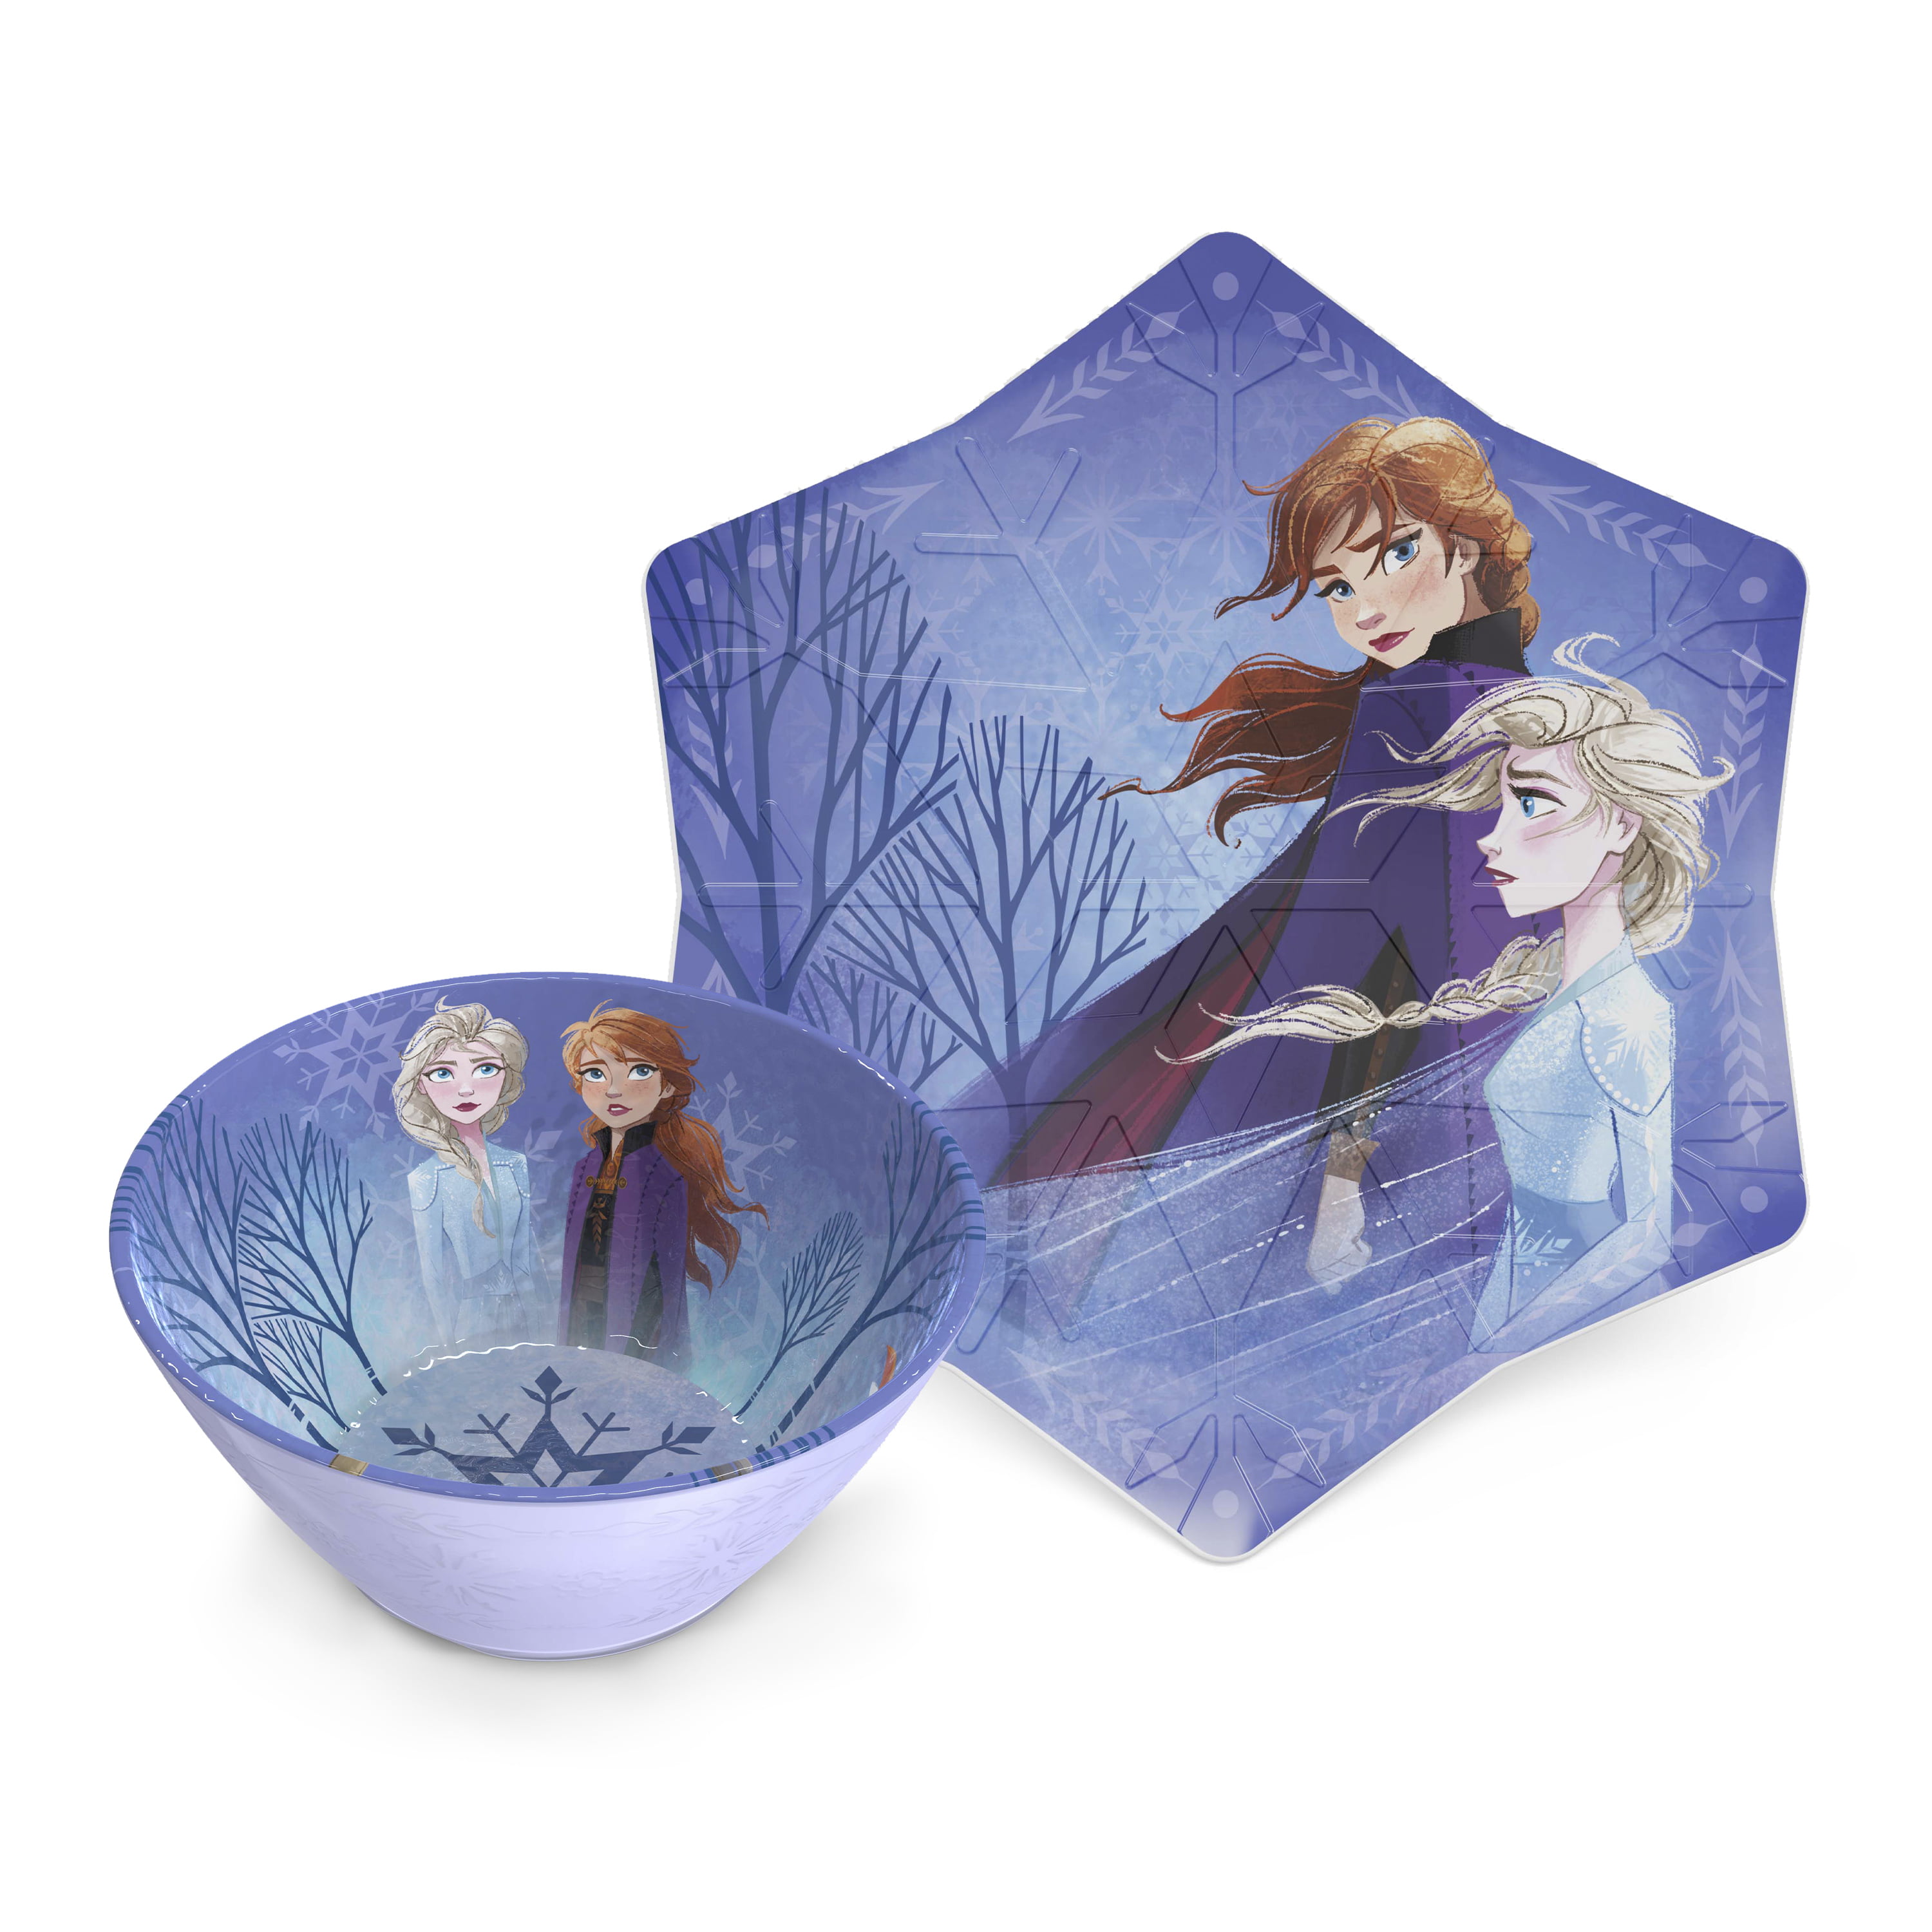 Zak Design Frozen Inspired Kids Mealtime Plastic Placemat Makes Clean Up A Breeze!